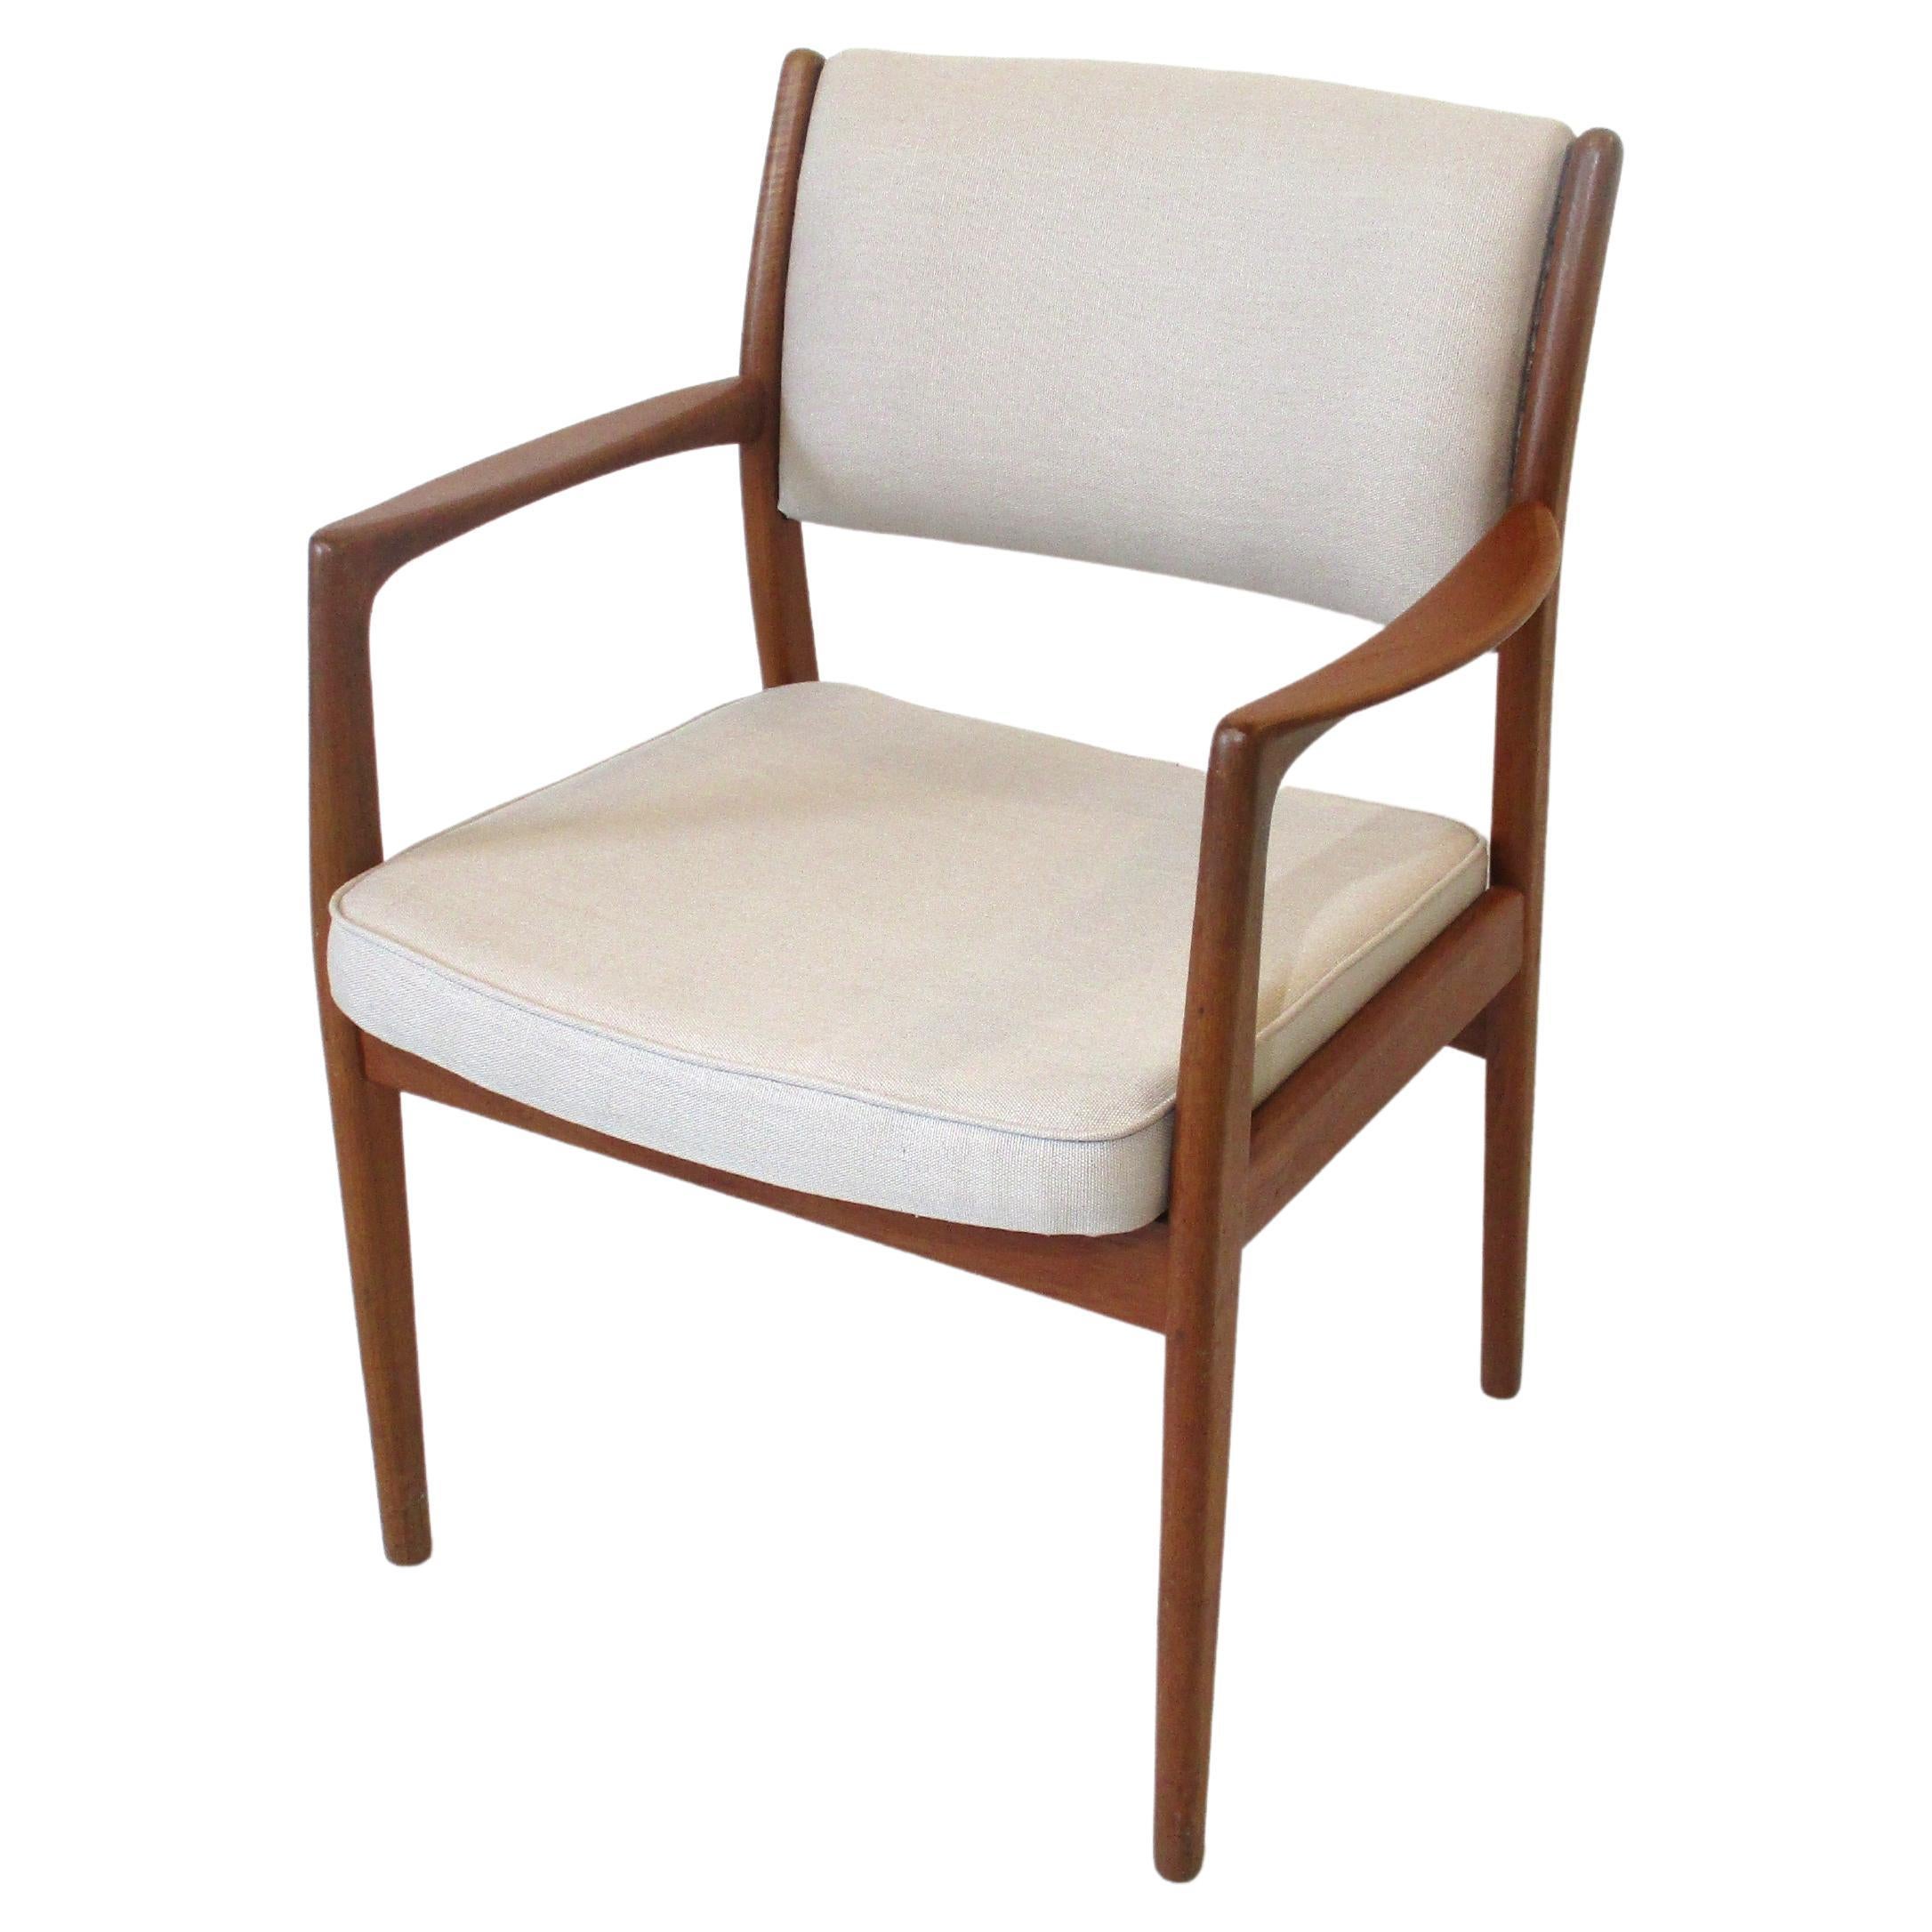 Teak Occasional Chair by Dux / Ekselius, Ohlsson Sweden For Sale